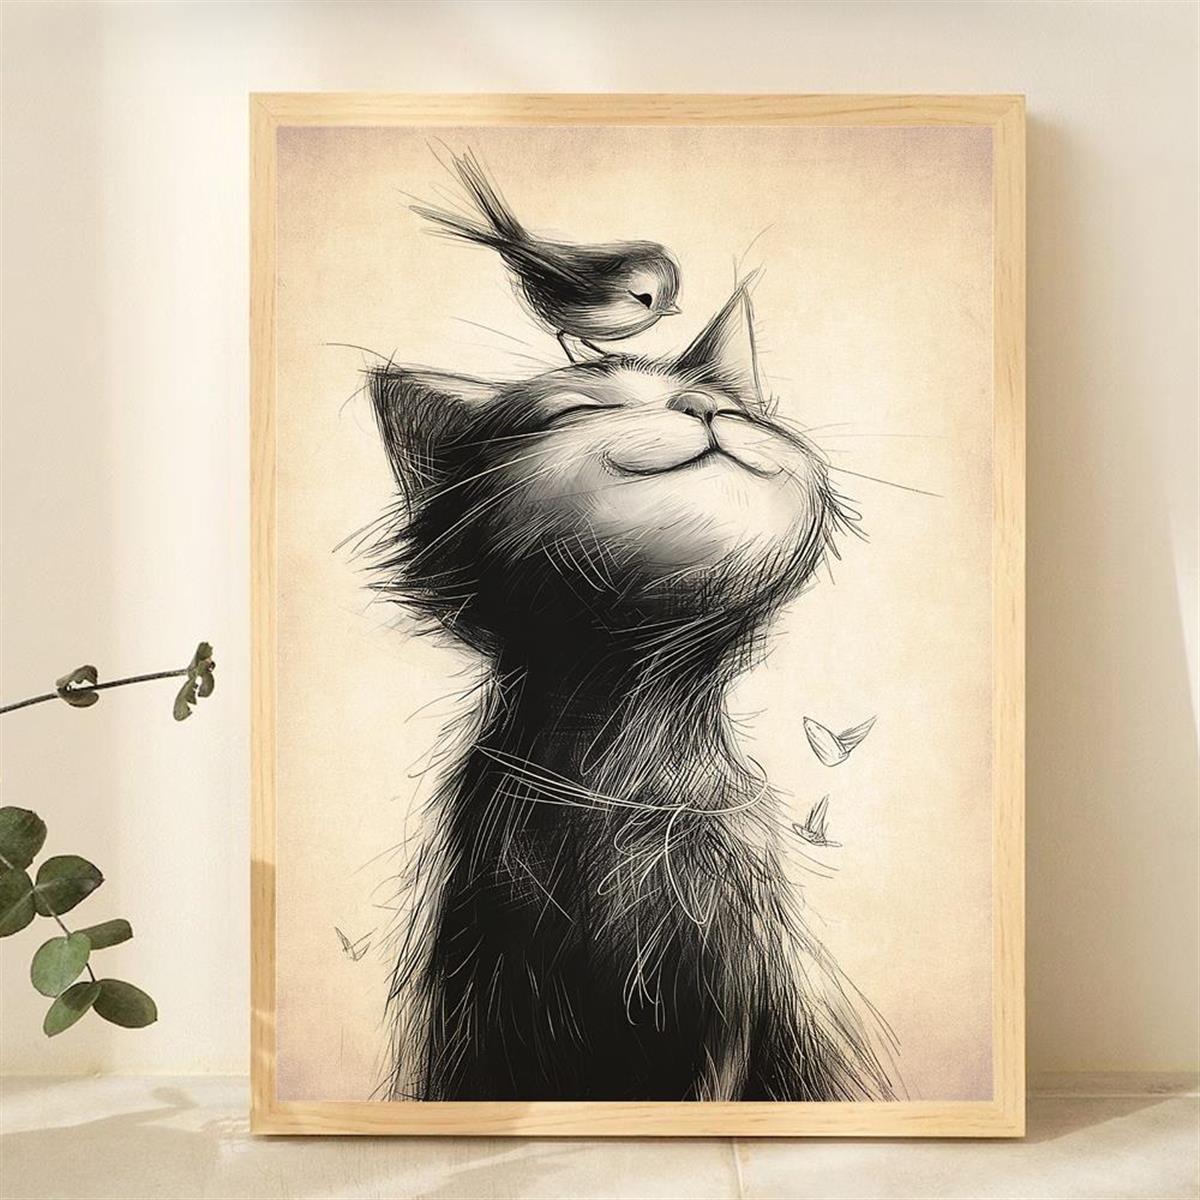 

1pc Unframed Canvas Poster, Modern Art, A Bird Standing On A Cat's Head, A Cute And Warm Decor, Ideal Gift For Bedroom Living Room Corridor, Wall Art, Wall Decor, Winter Decor, Room Decoration